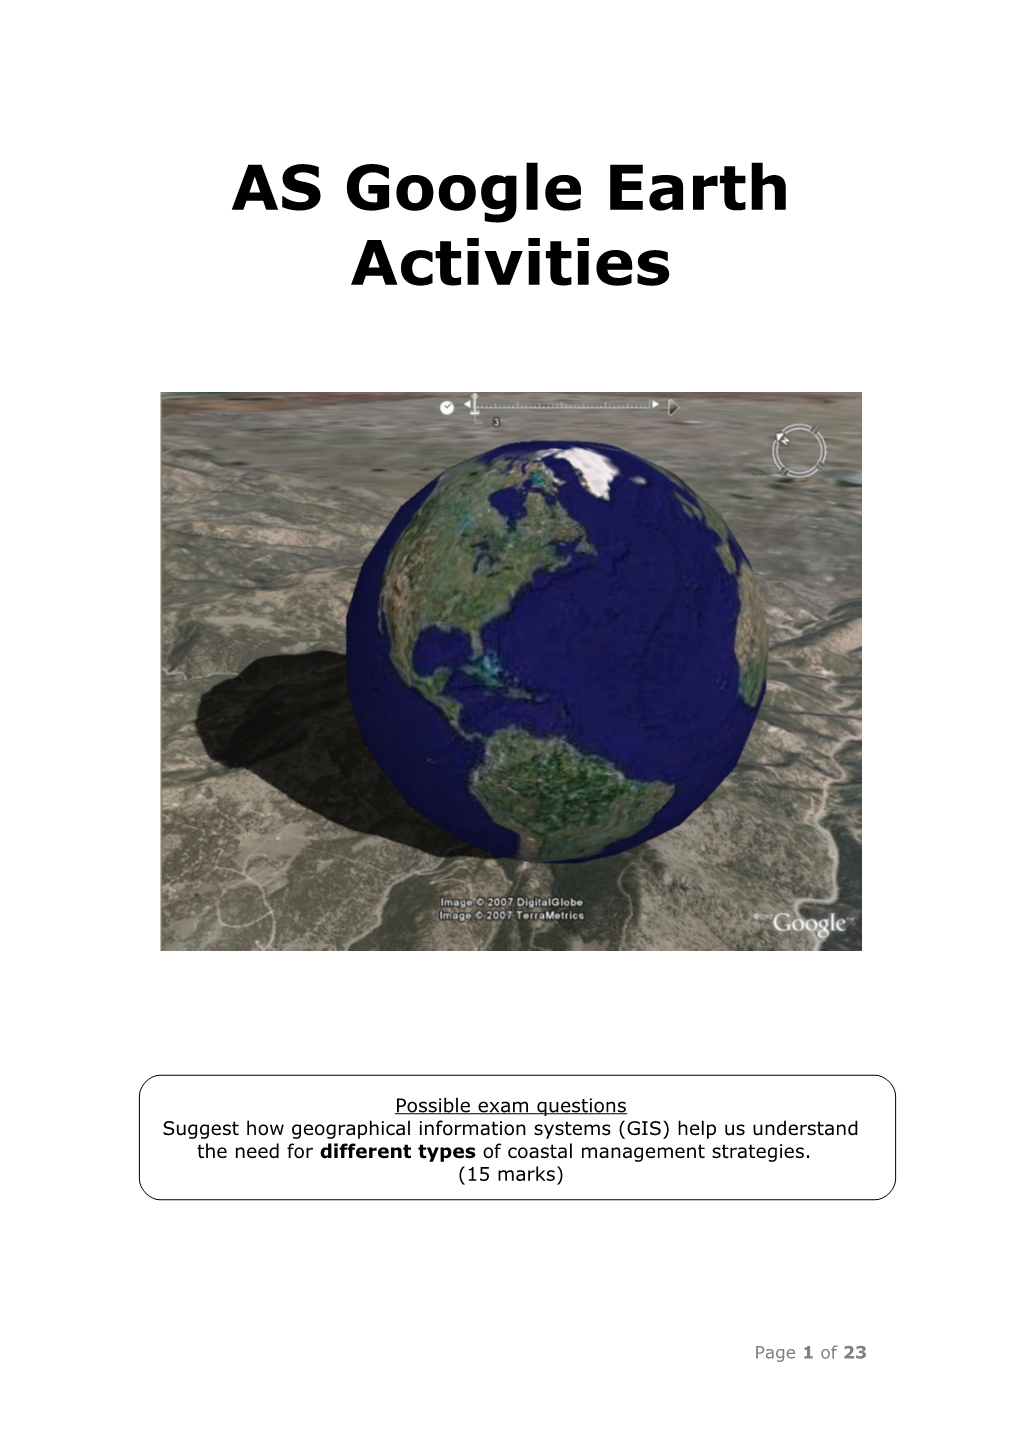 AS Google Earth Activities